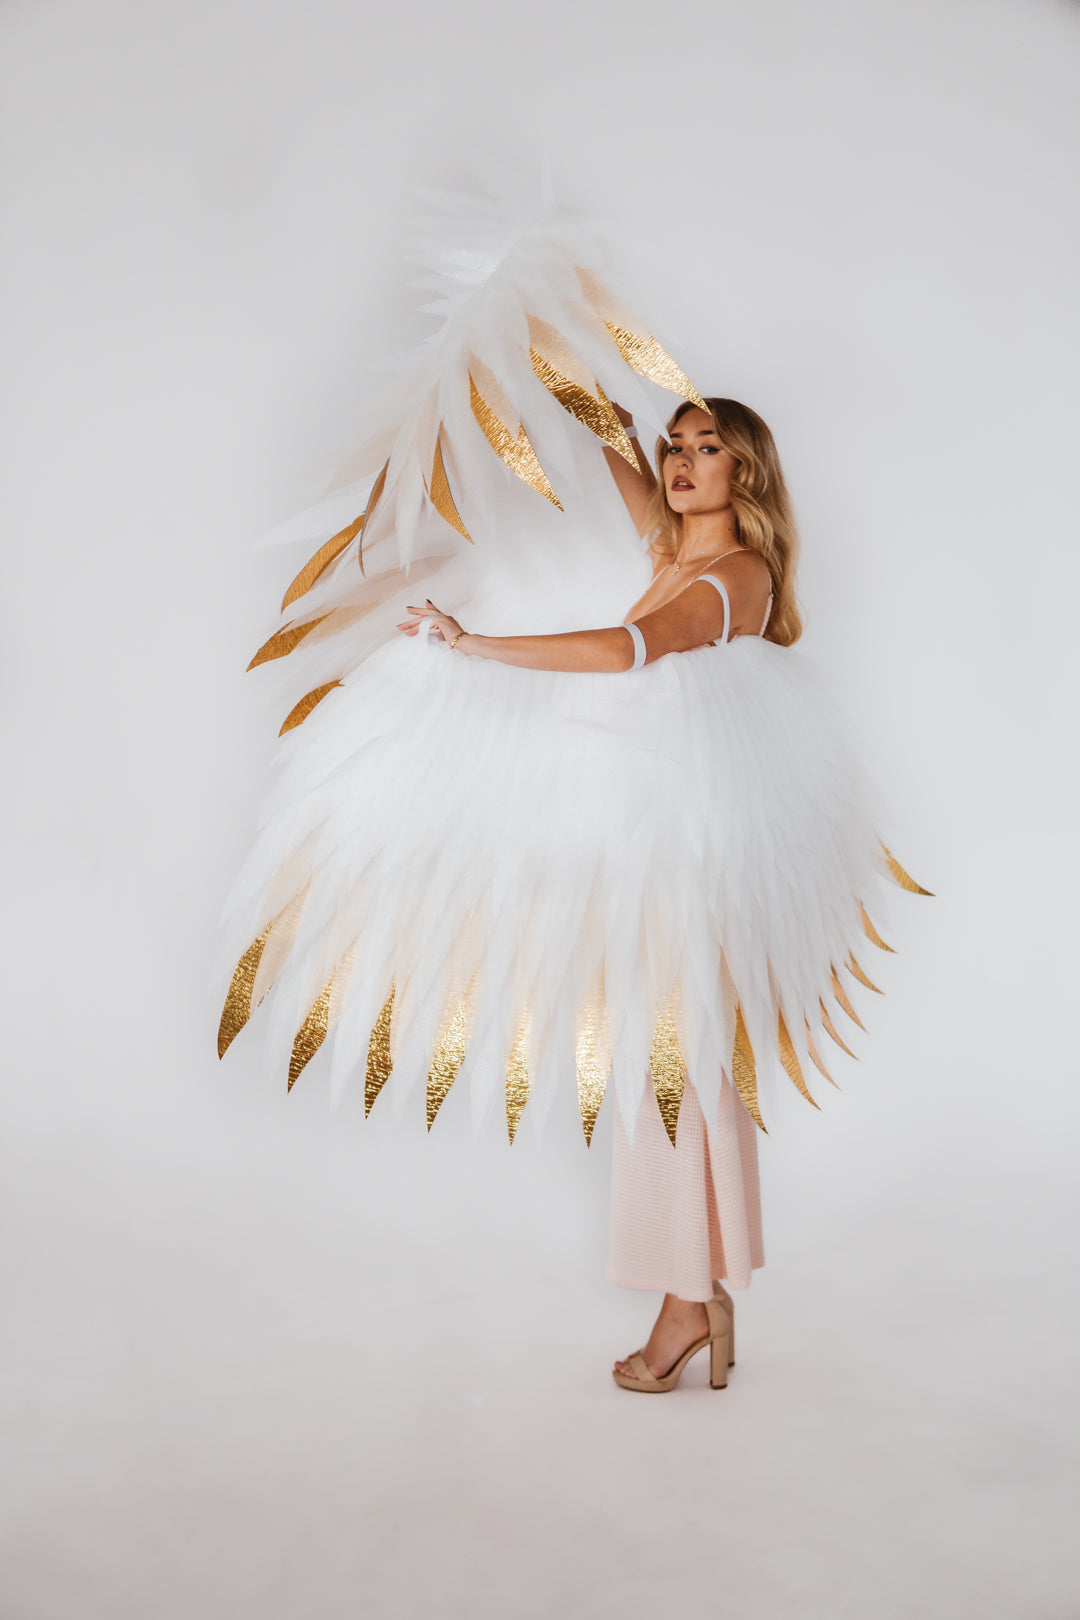 White wings for dancing  "Bogacci brand"